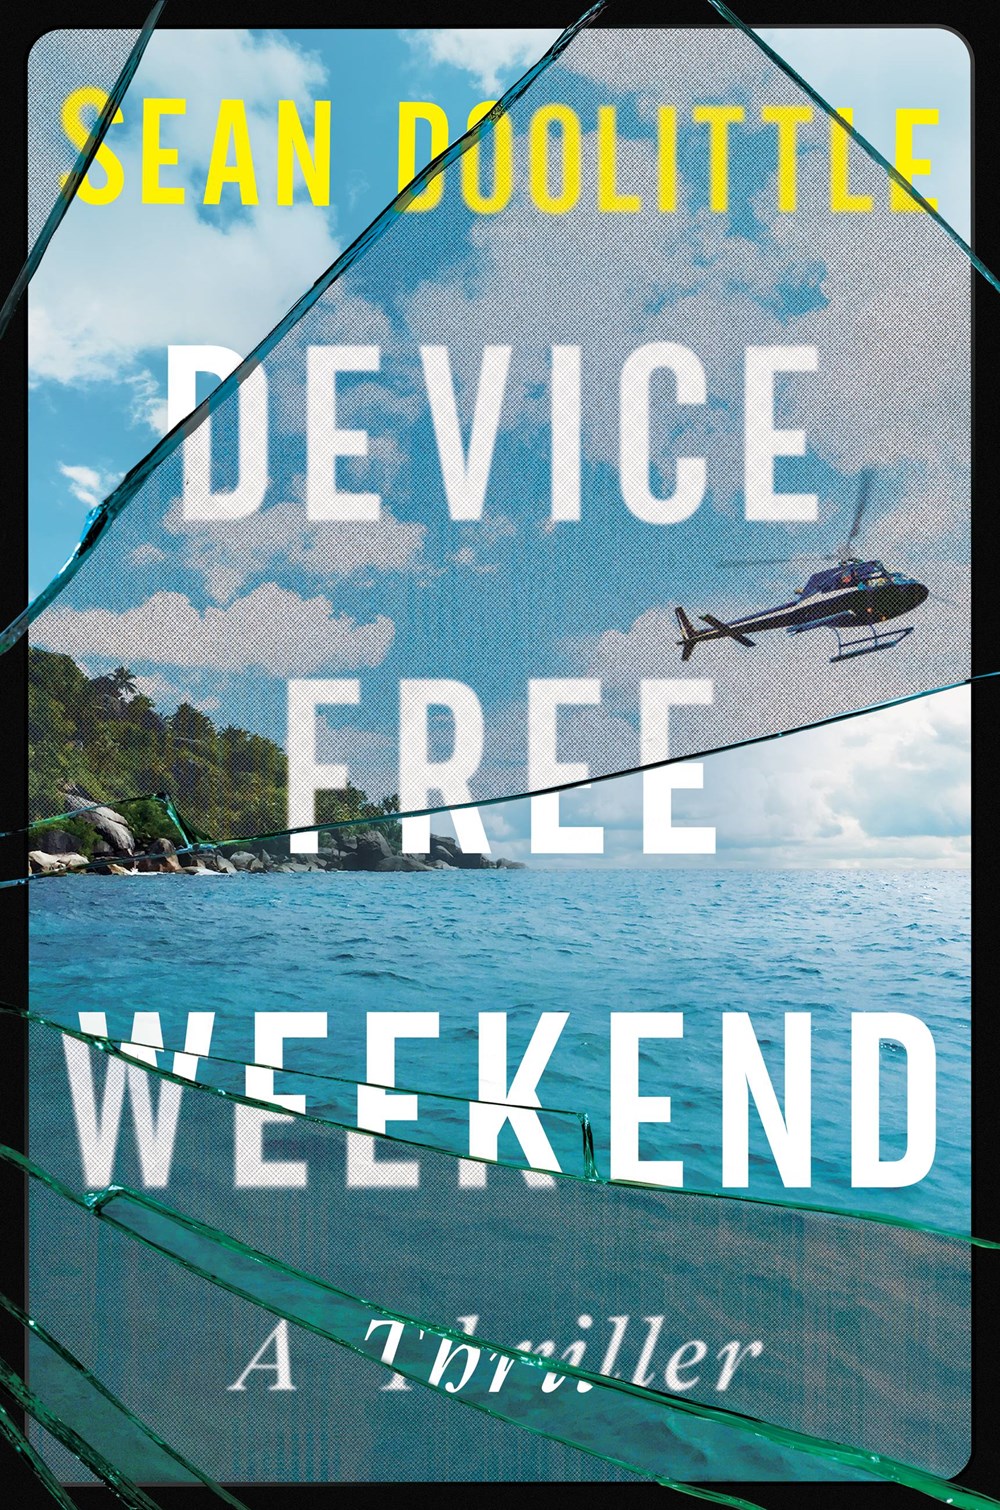 Device Free Weekend cover image